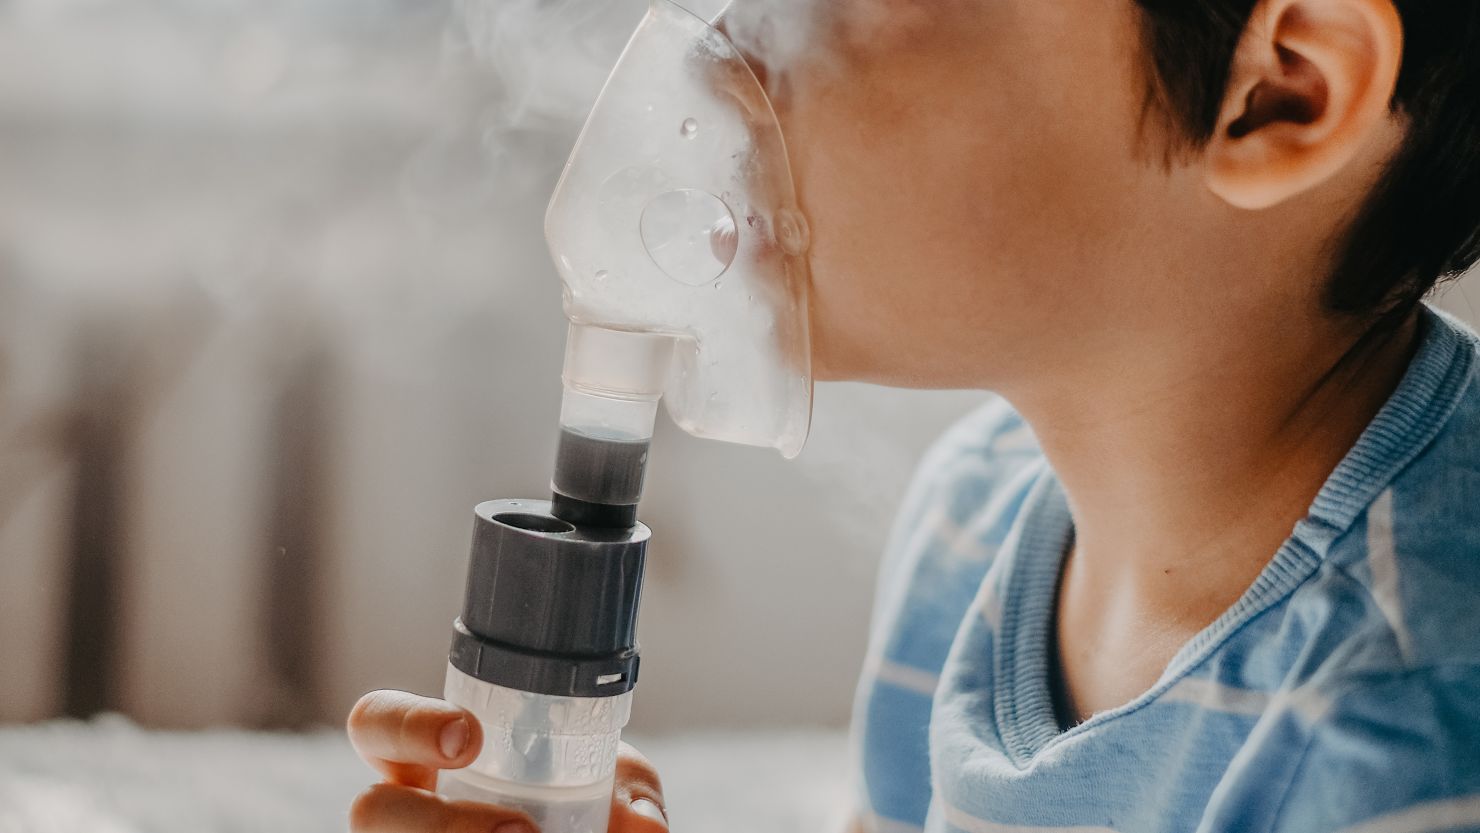 Albuterol shortage is about to get worse, especially in hospitals CNN